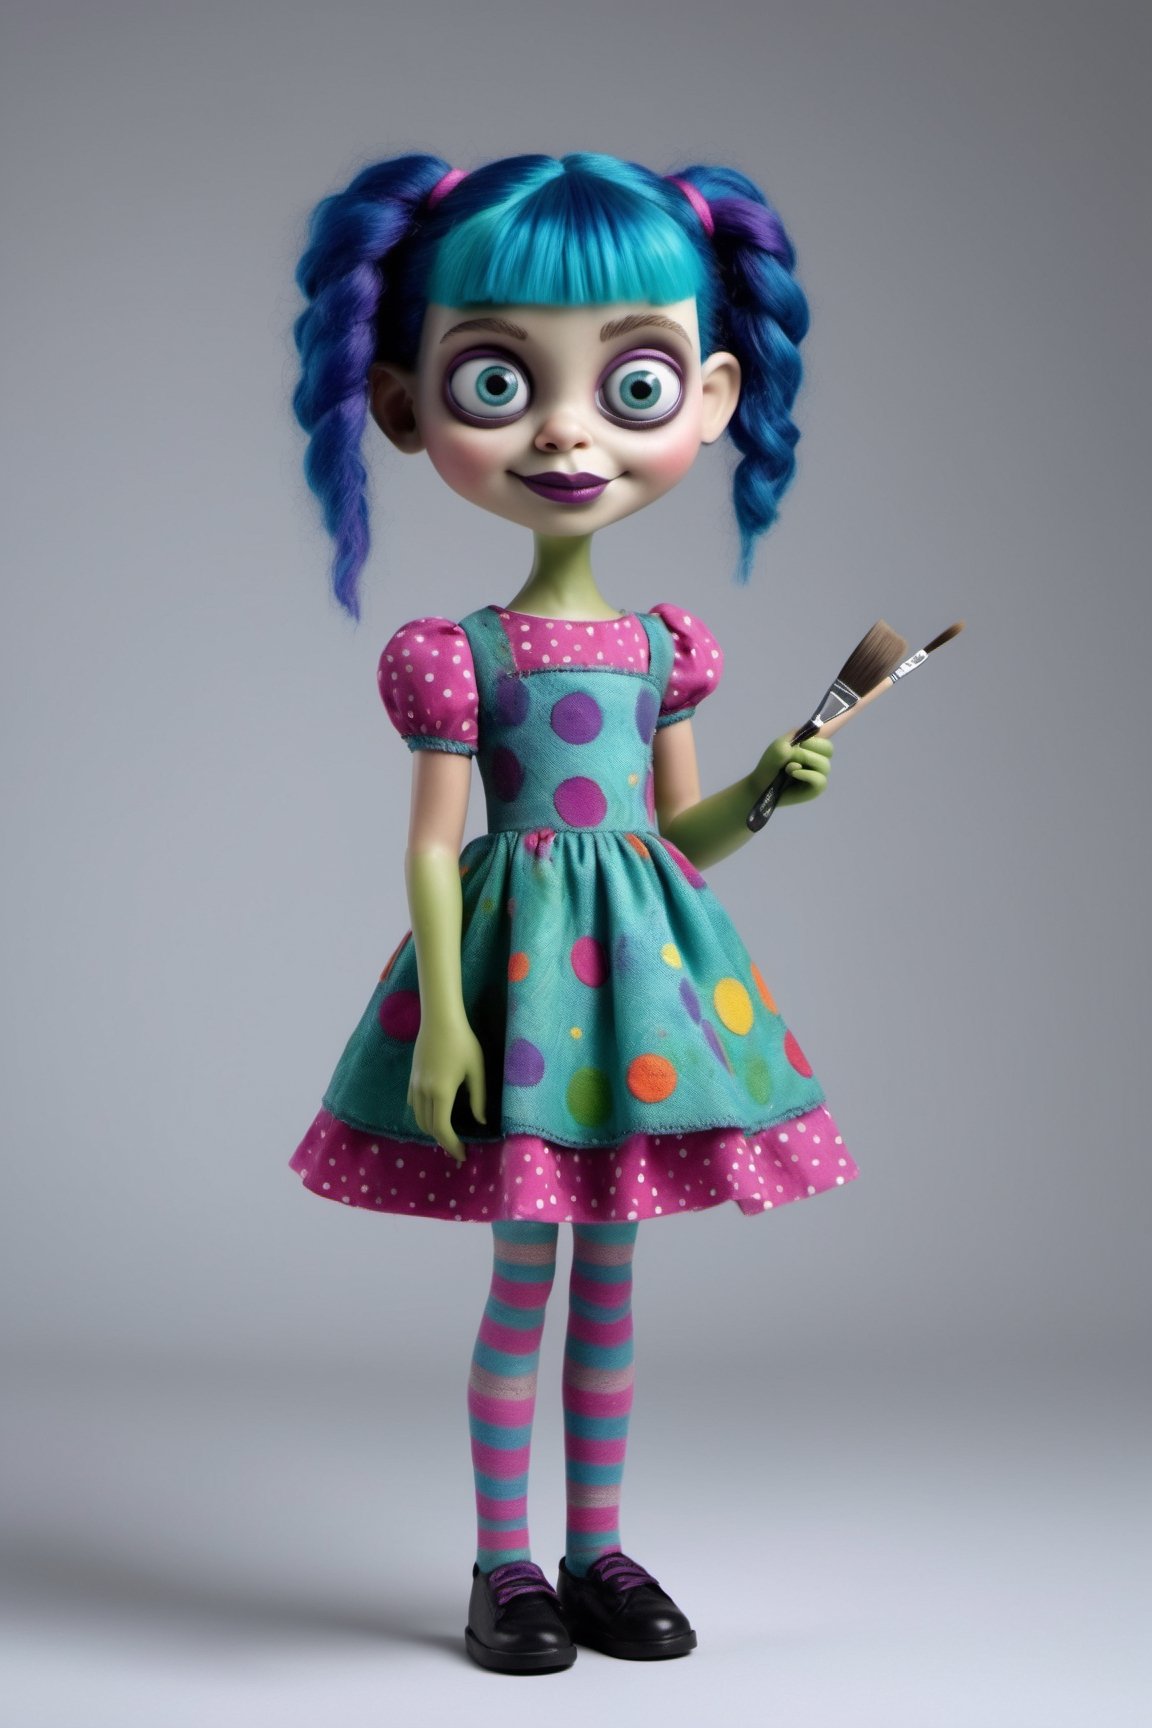 Hyper-realistic, Cinematic Render, creepy stop motion movie, Tim Burton style, full body portrait, young, tiny, ((very cute)) Frankenstein girl, creepy patchwork dress, polka dots, big number 10 on the dress, very large eyes, (holding a paintbrush), bangs and pigtails, magenta and blue hair, green skin, sutures and scars, chubby, cute smile, blue eyes, inspired by Paranorman movie 